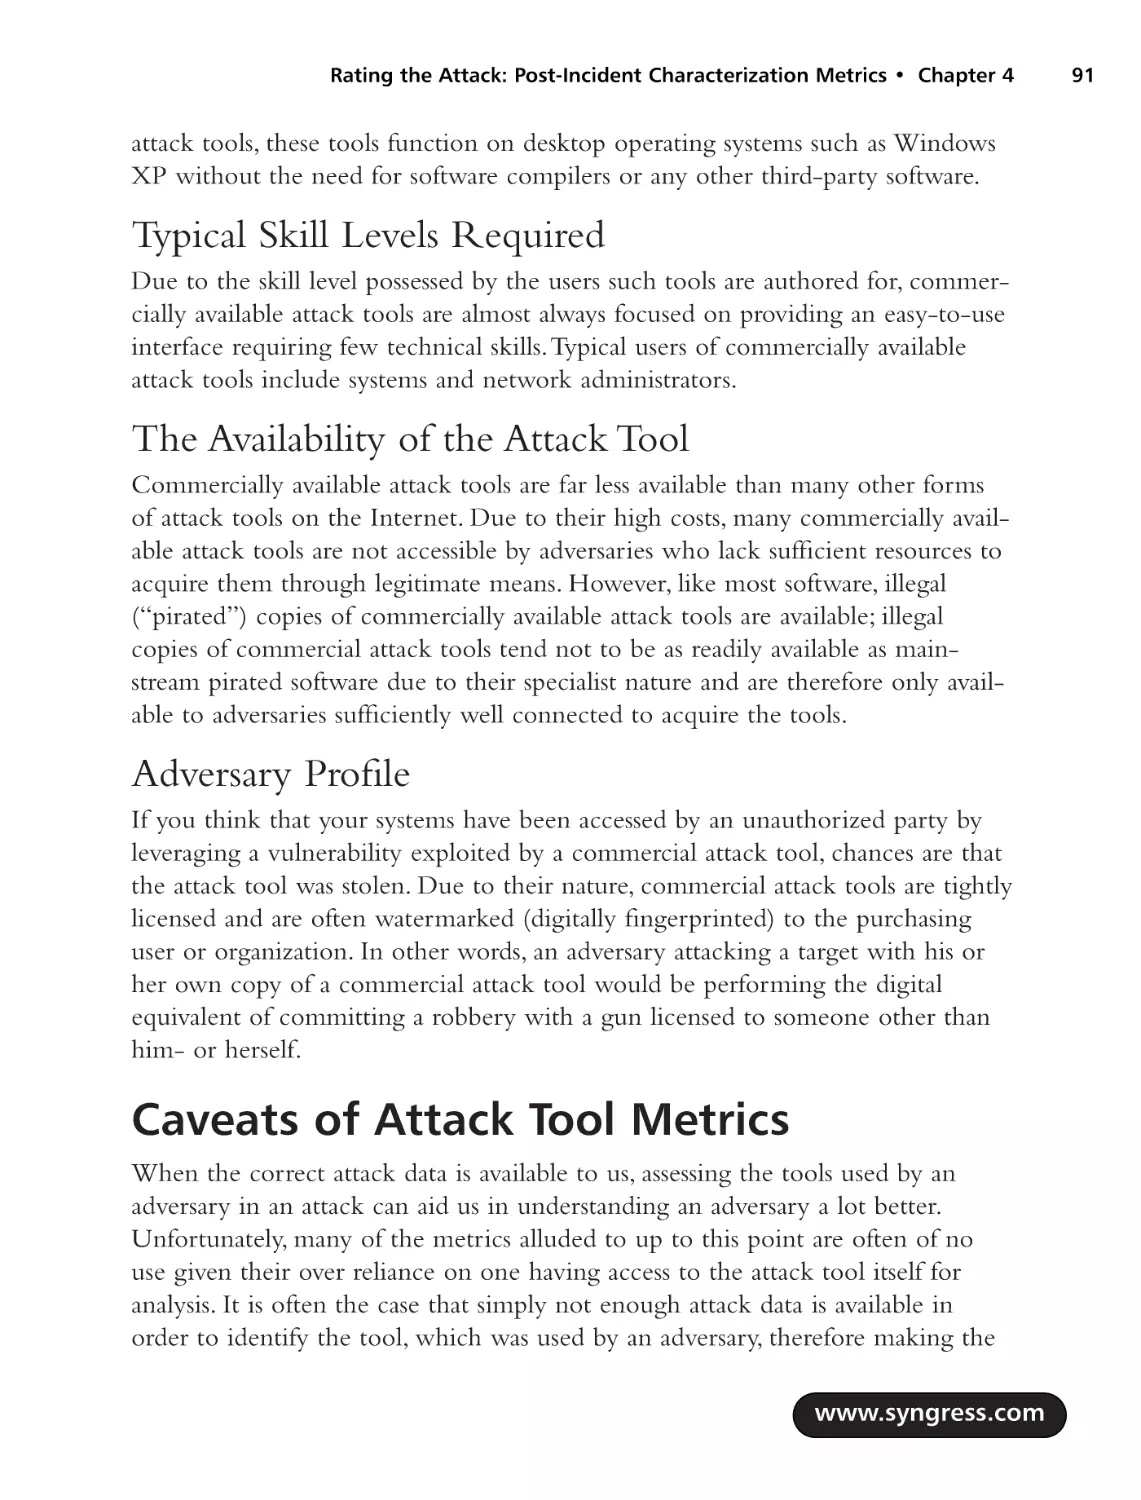 Typical Skill Levels Required
The Availability of the Attack Tool
Adversary Profile
Caveats of Attack Tool Metrics